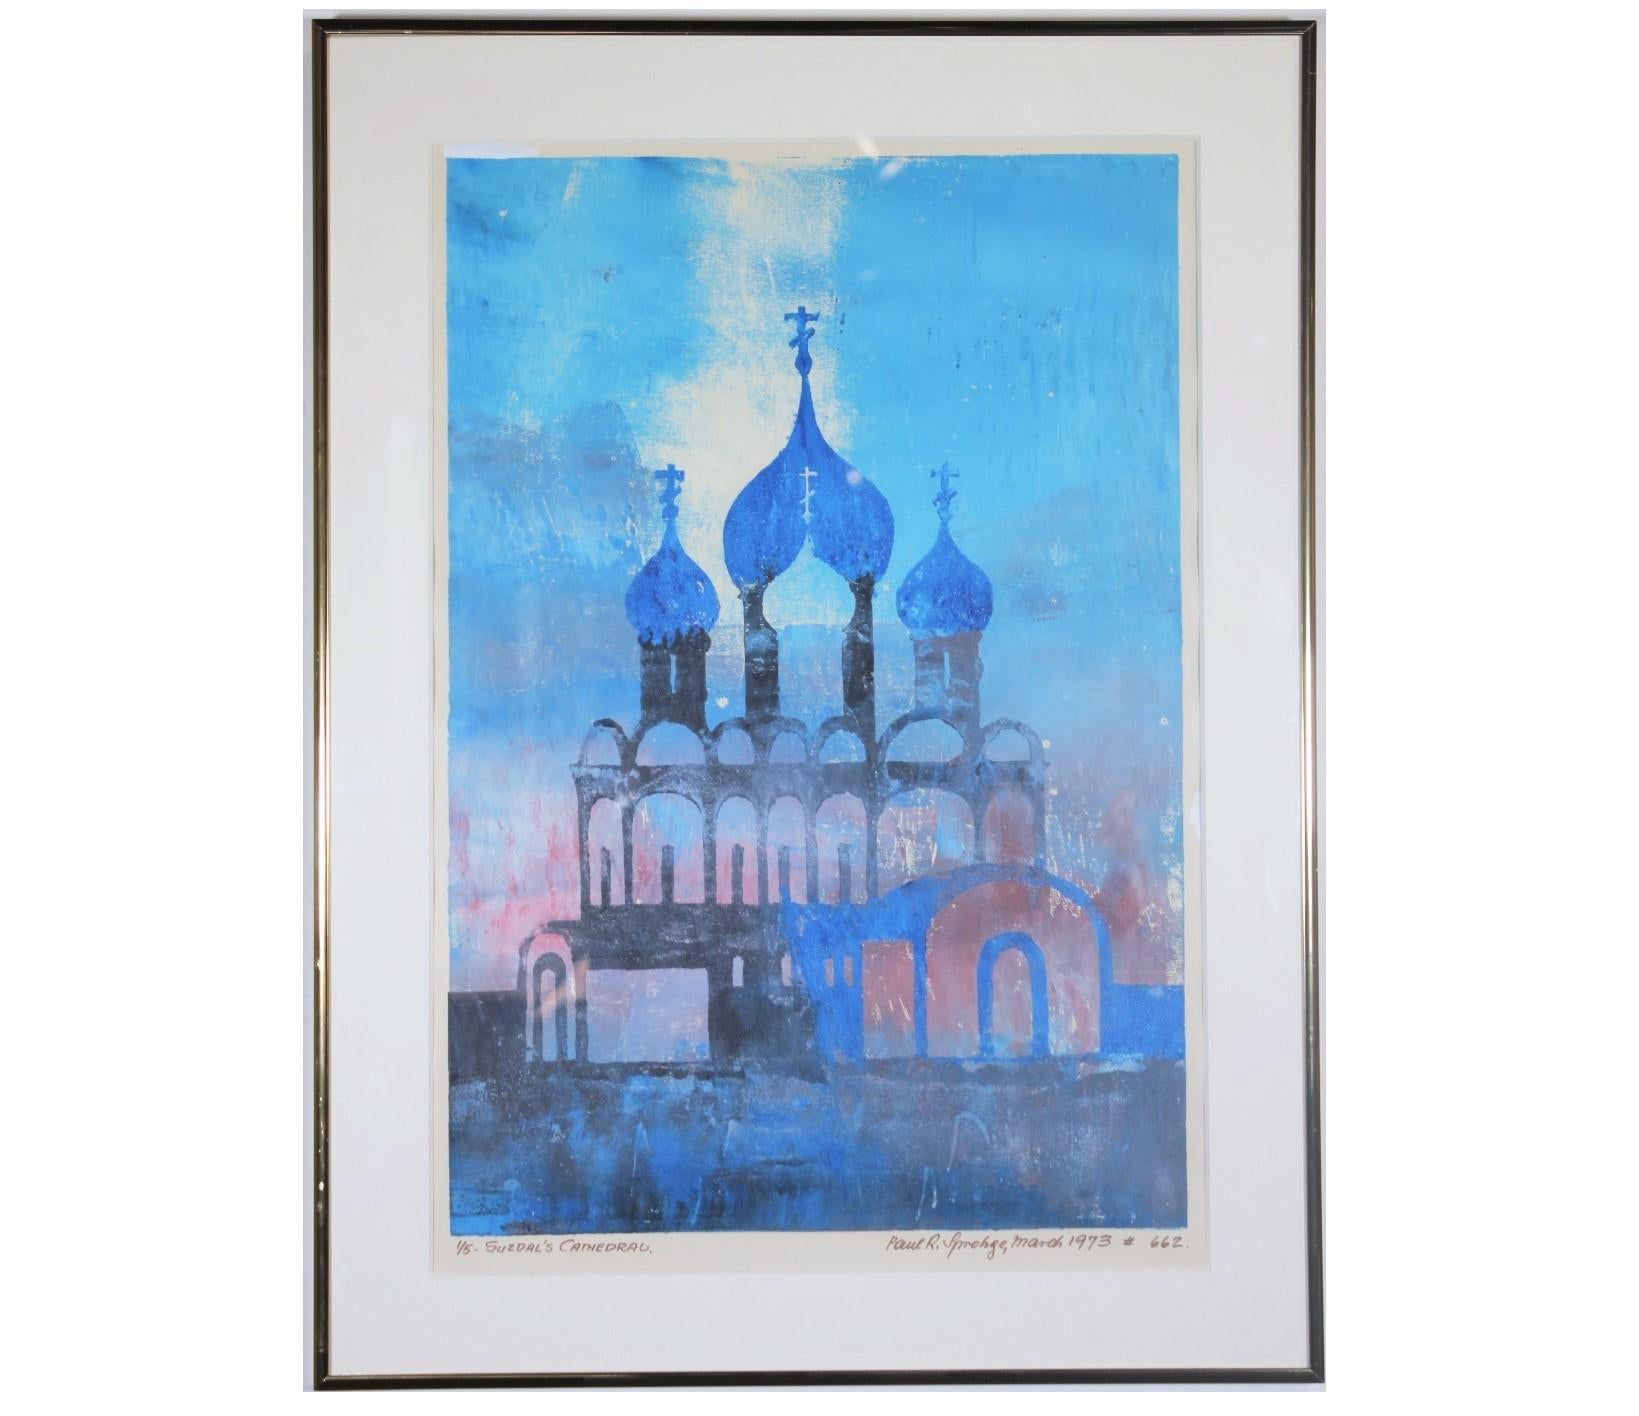 Paul Sprohge Landscape Print - "Suzdal's Cathedral" Blue Hue Impressionist Lithograph Edition 1 of 5